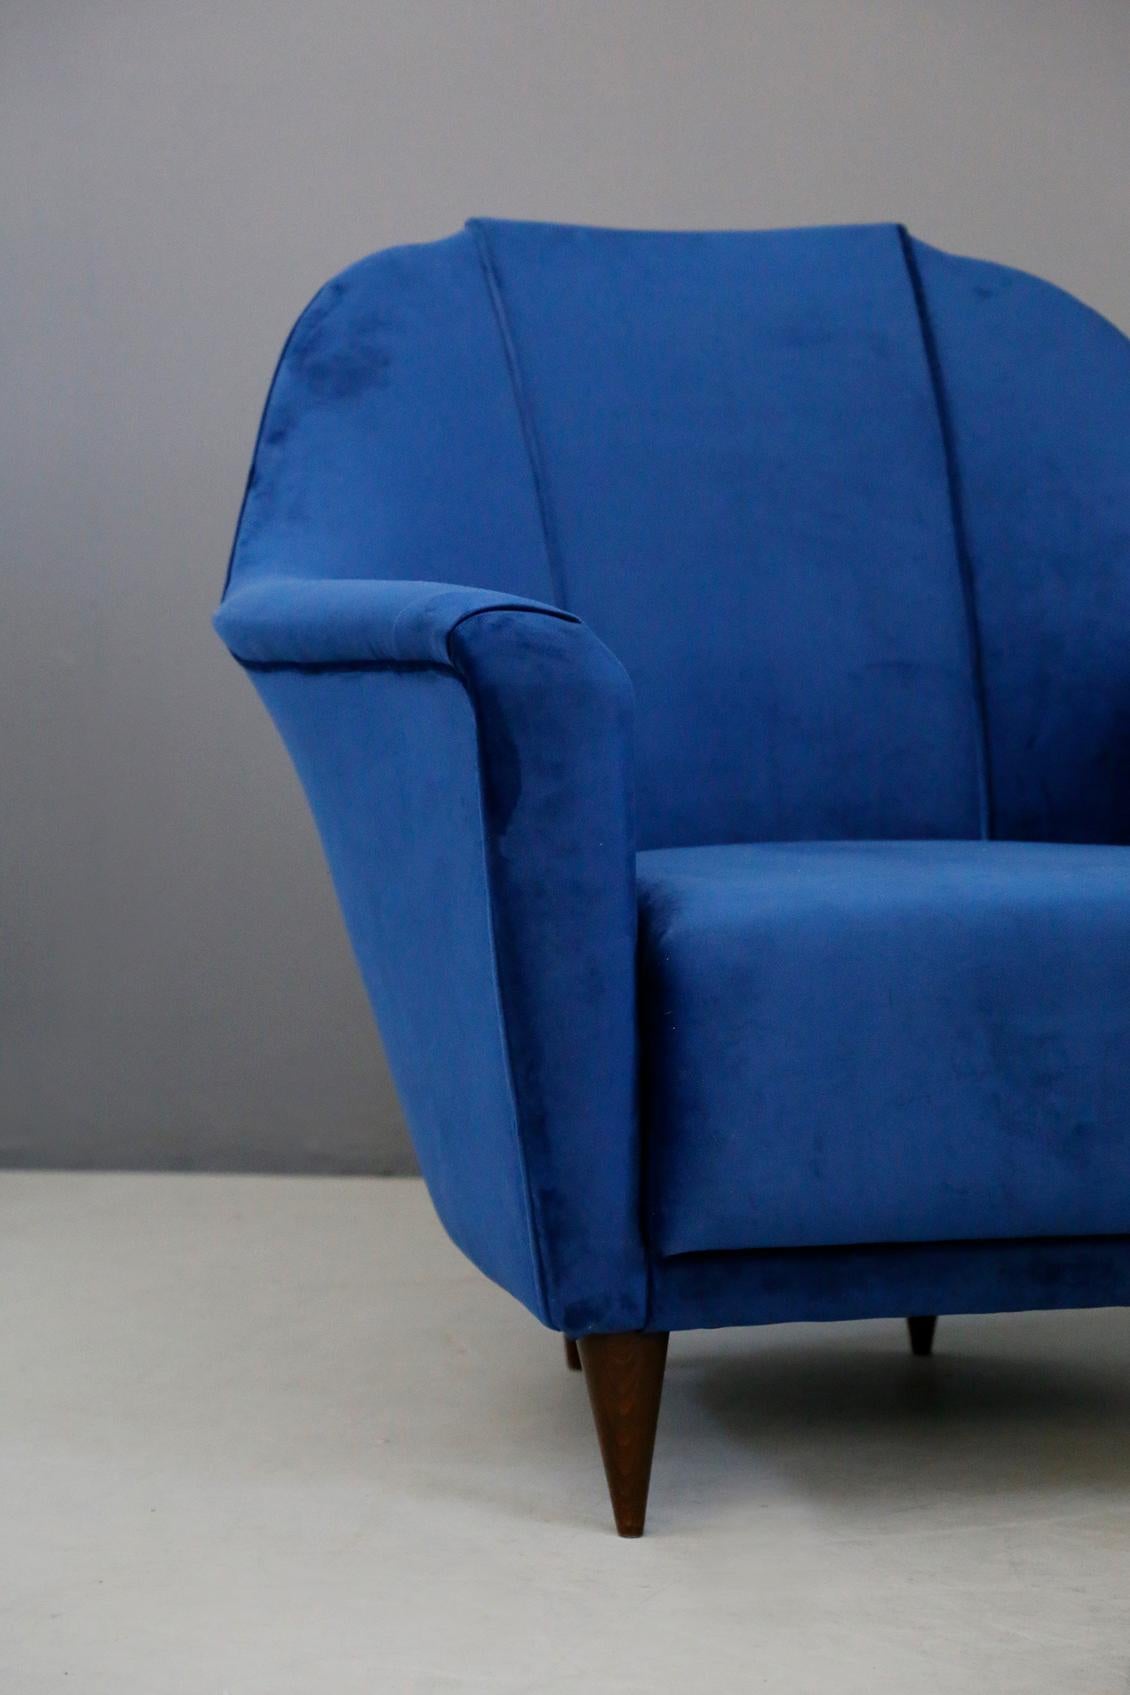 Elegant pair of armchairs by Ico Parisi for Ariberto Colombo Cantu from 1950s. The armchairs have been restored in blue velvet. The feet are conical shaped in walnut wood. Their beautiful shape is ideal for all types of living rooms. The